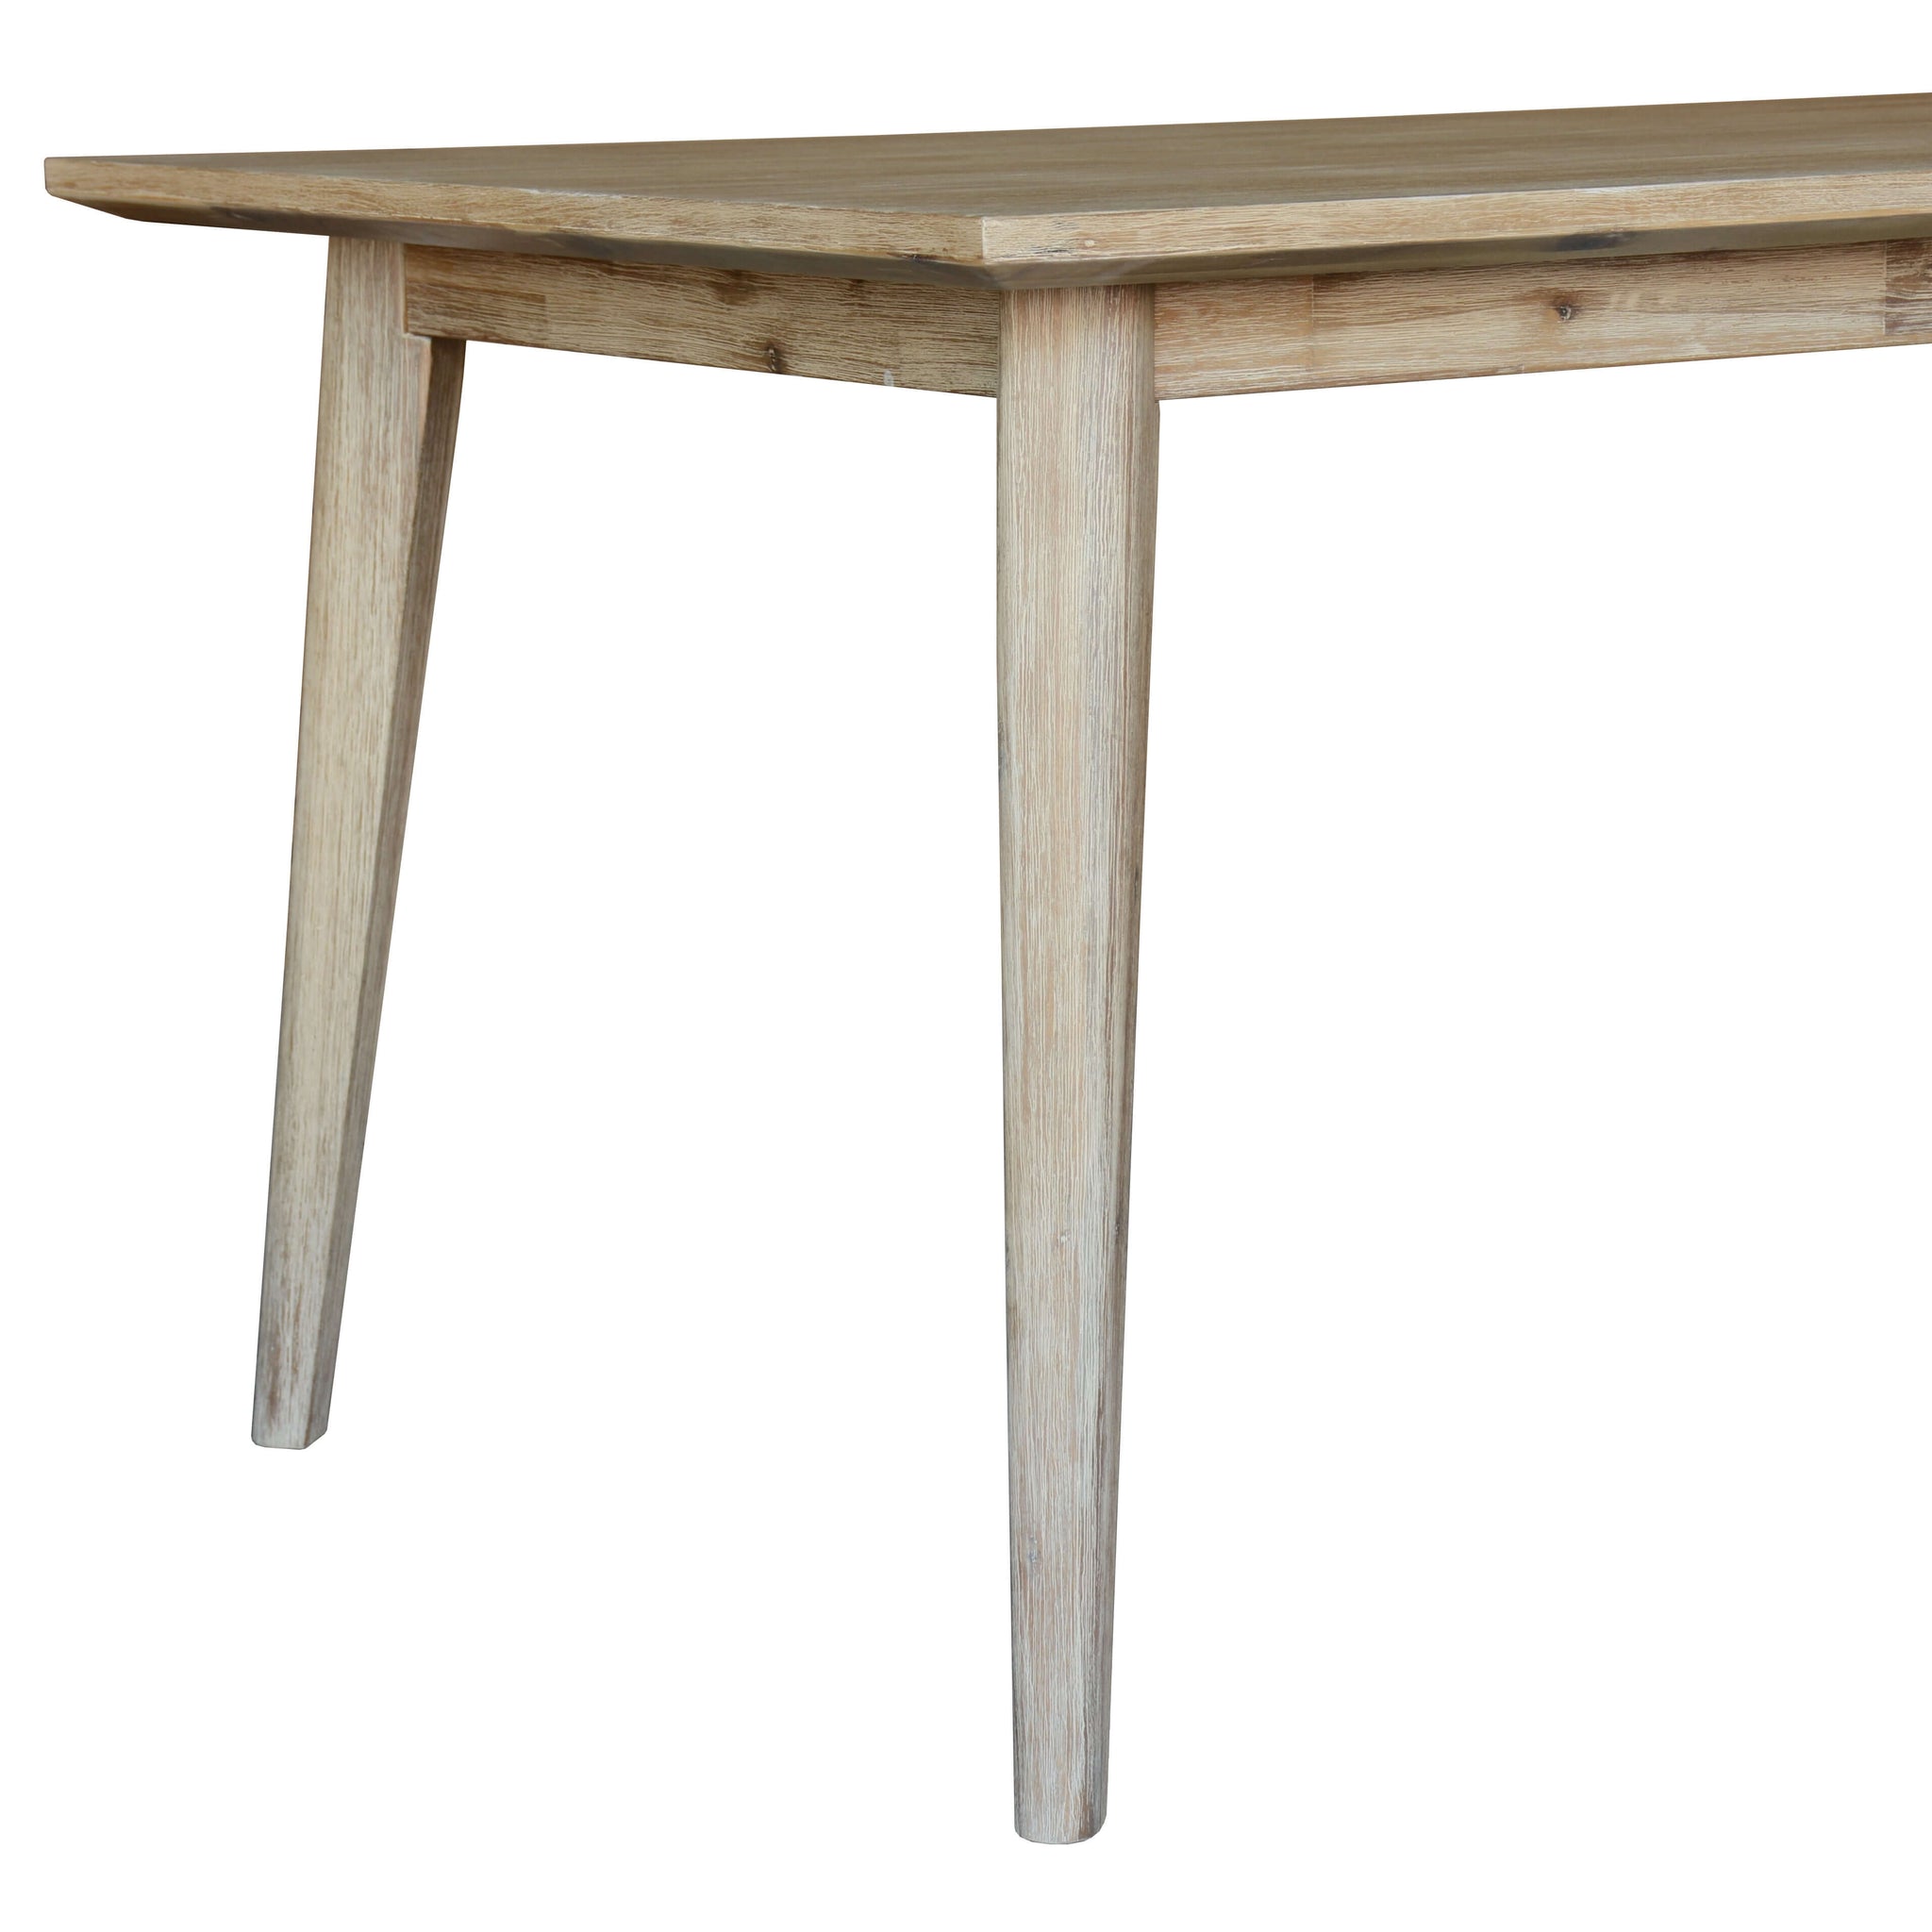 Grevillea Dining Table 210cm Solid Acacia Timber Wood Tropical Furniture - Brown-Upinteriors